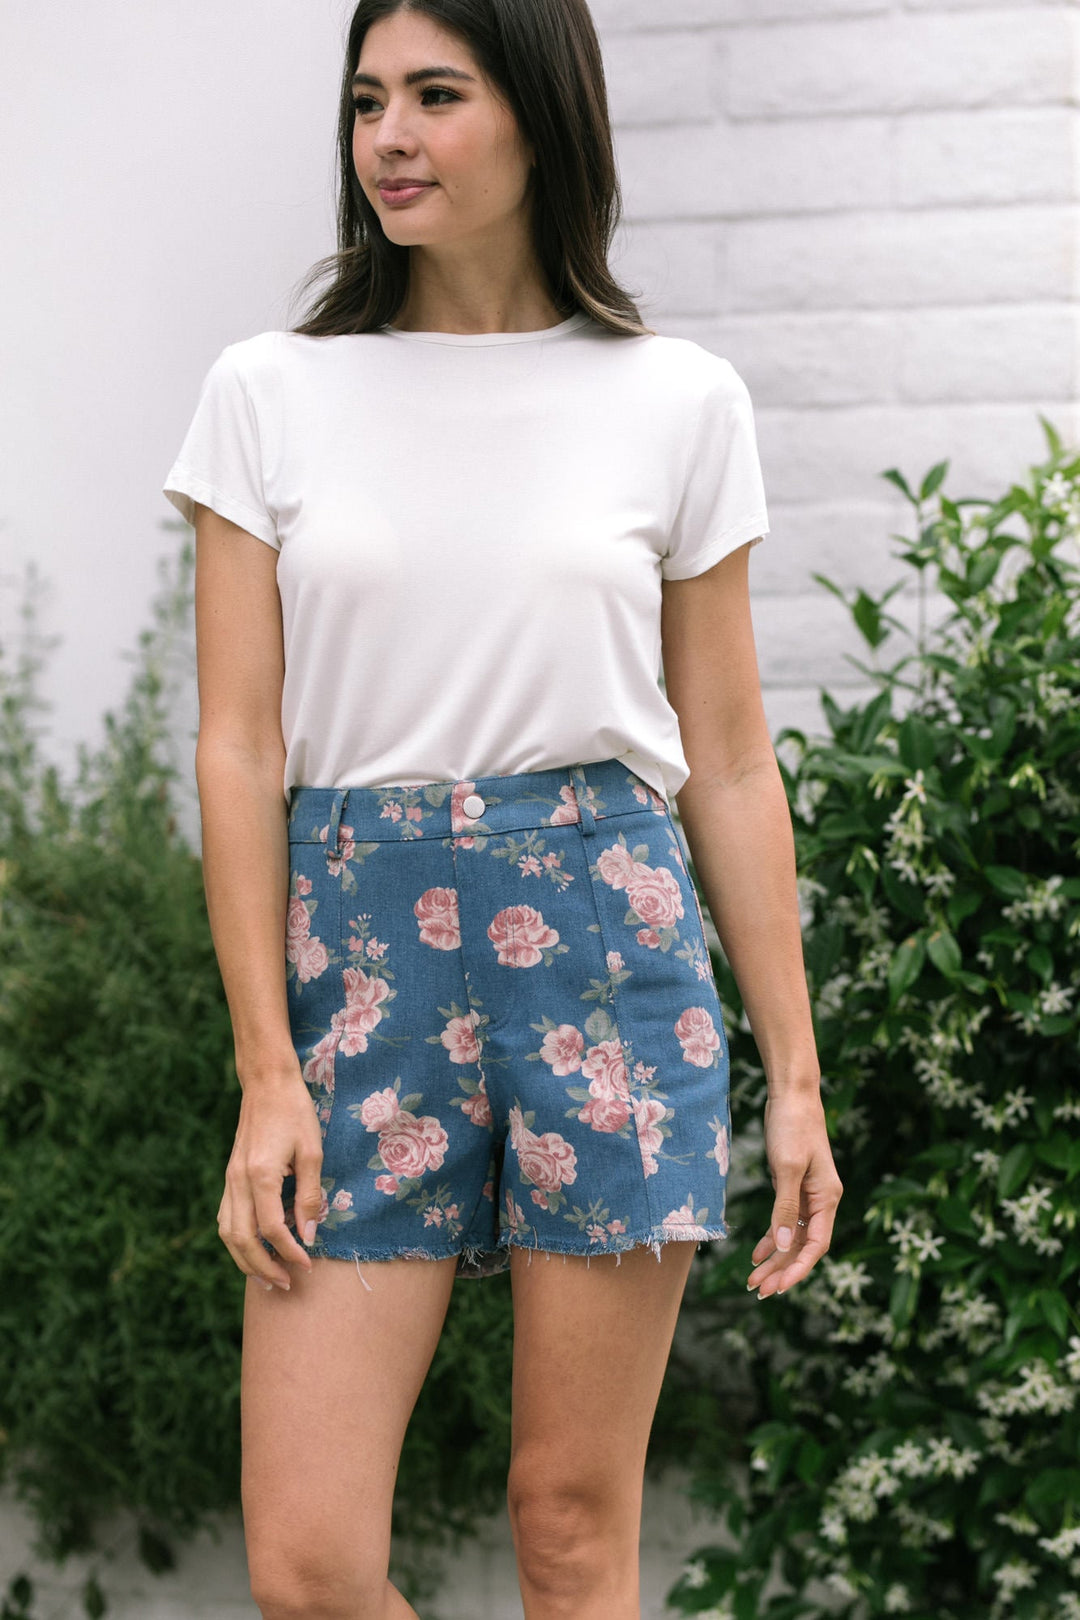 How To Wear Bermuda Shorts: 10 Outfit Ideas